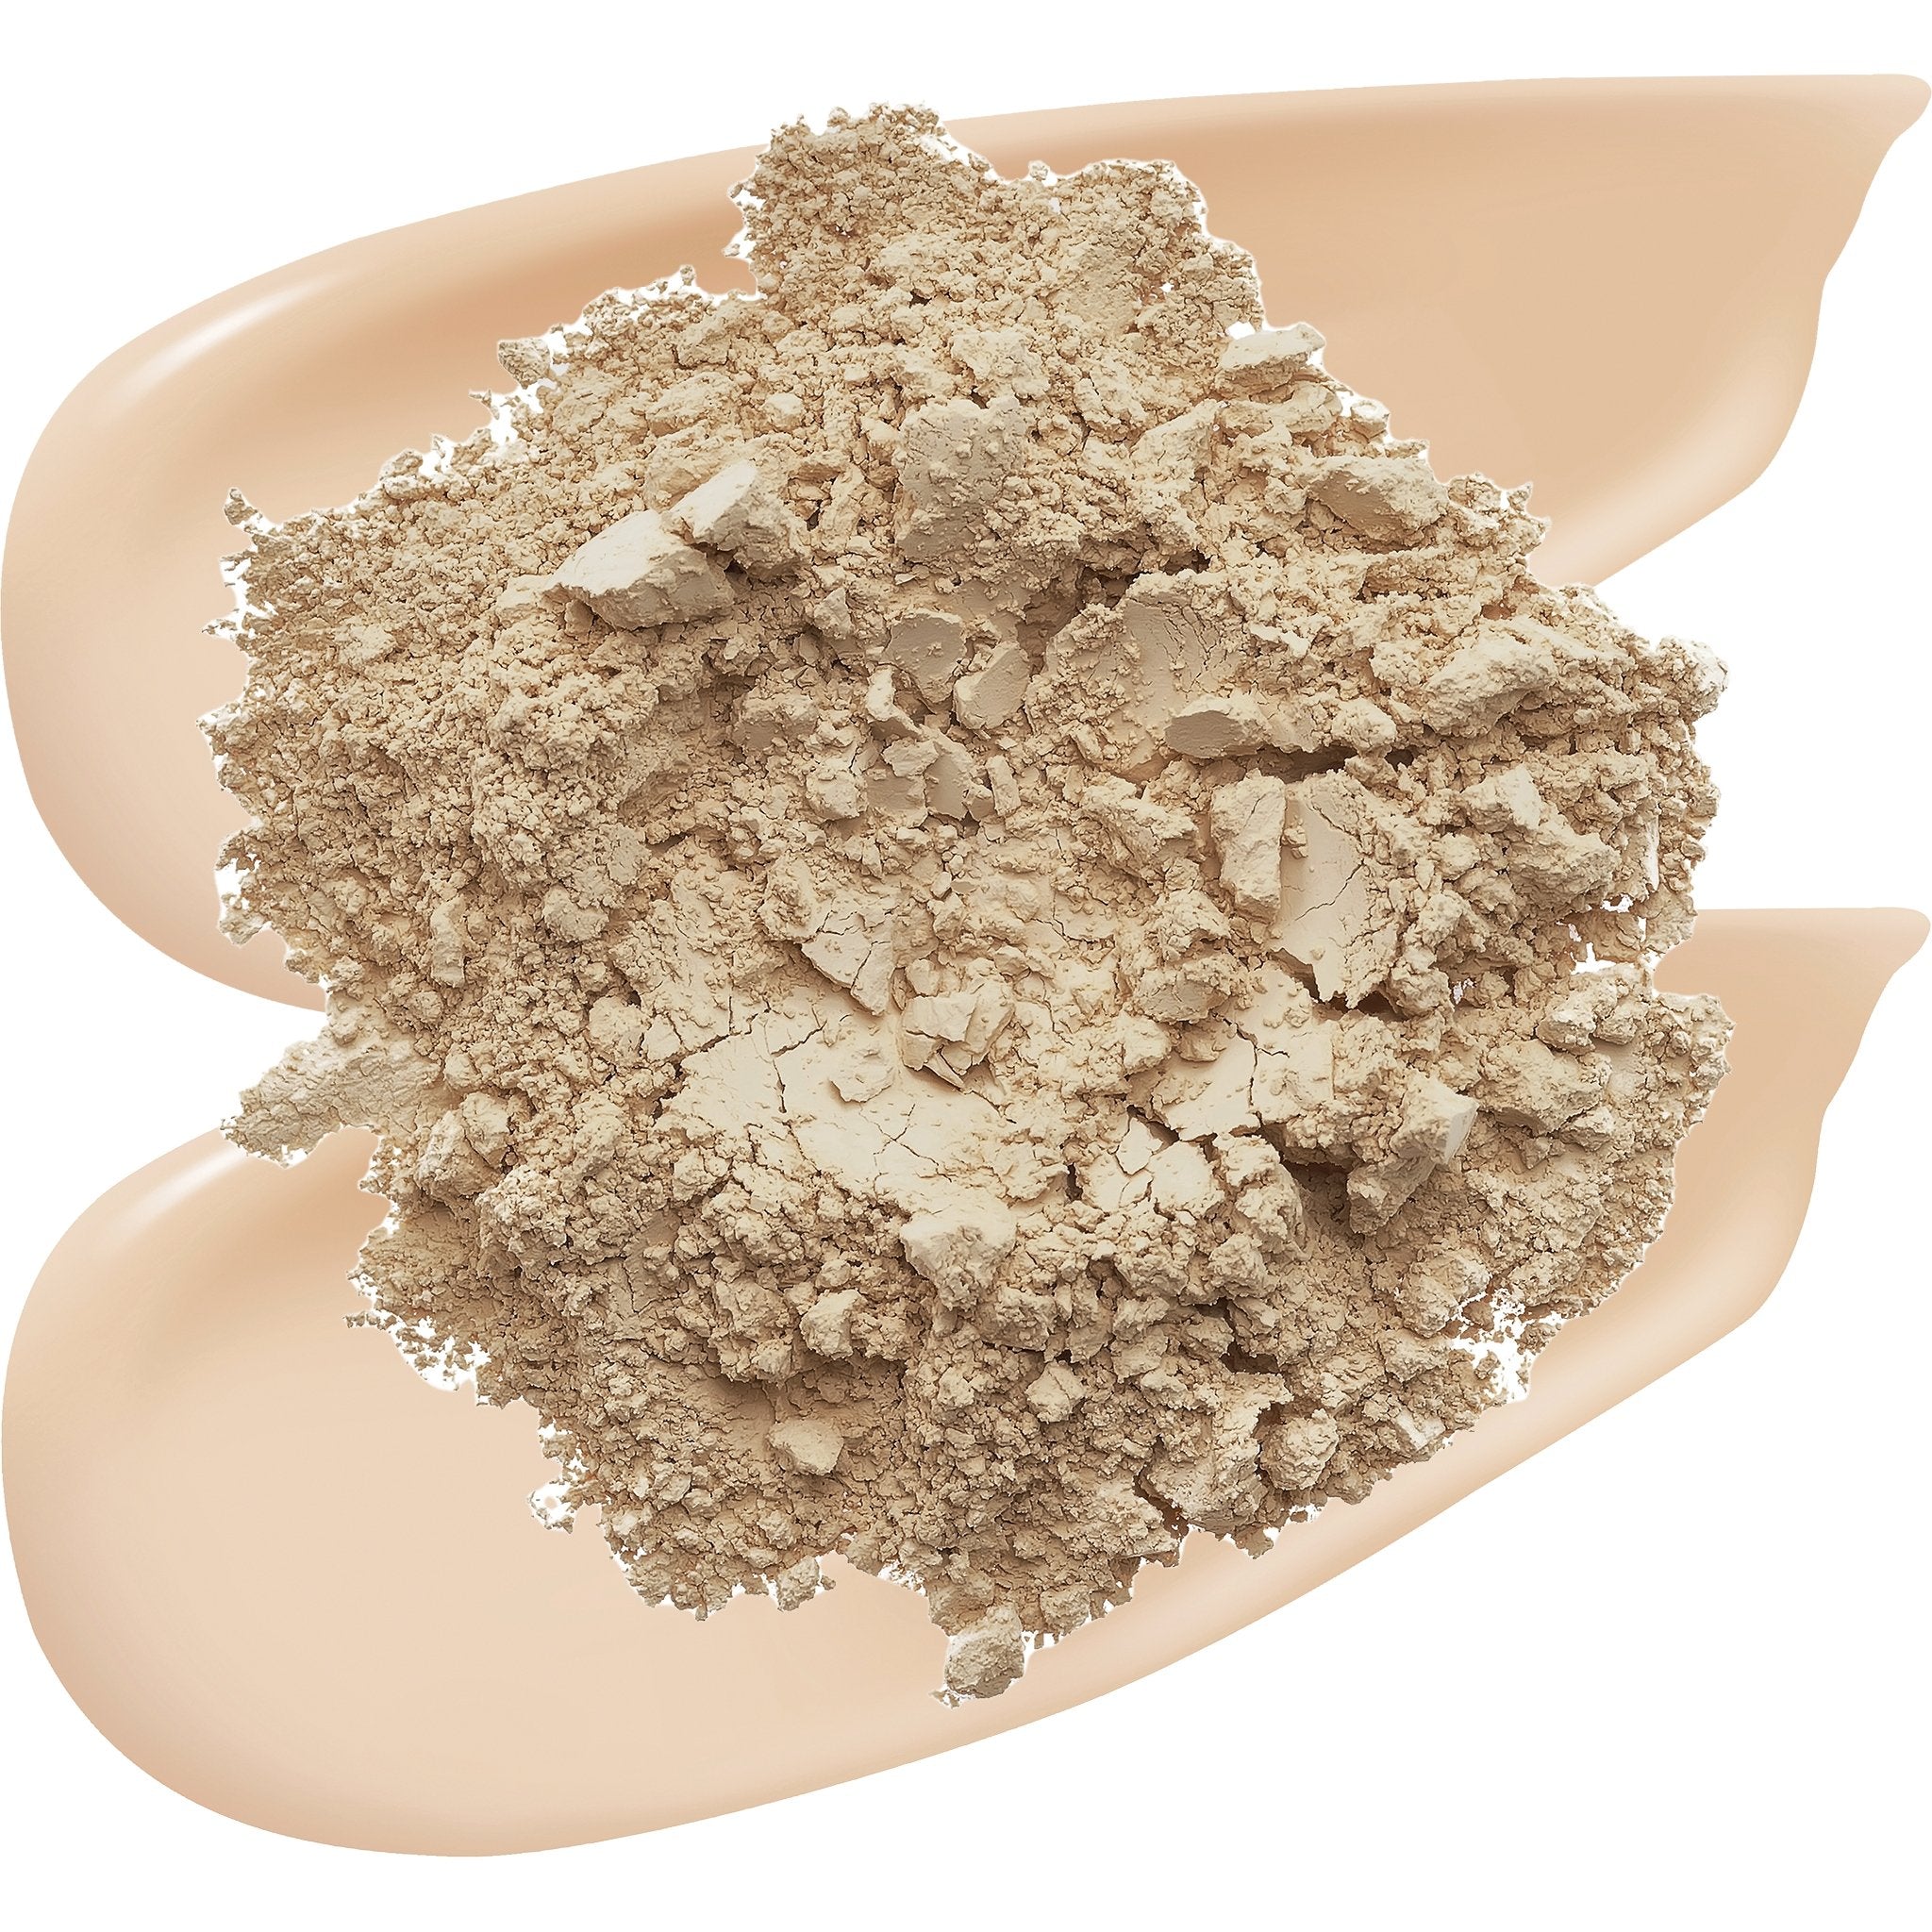 NEW Foundation Trial Set - mypure.co.uk